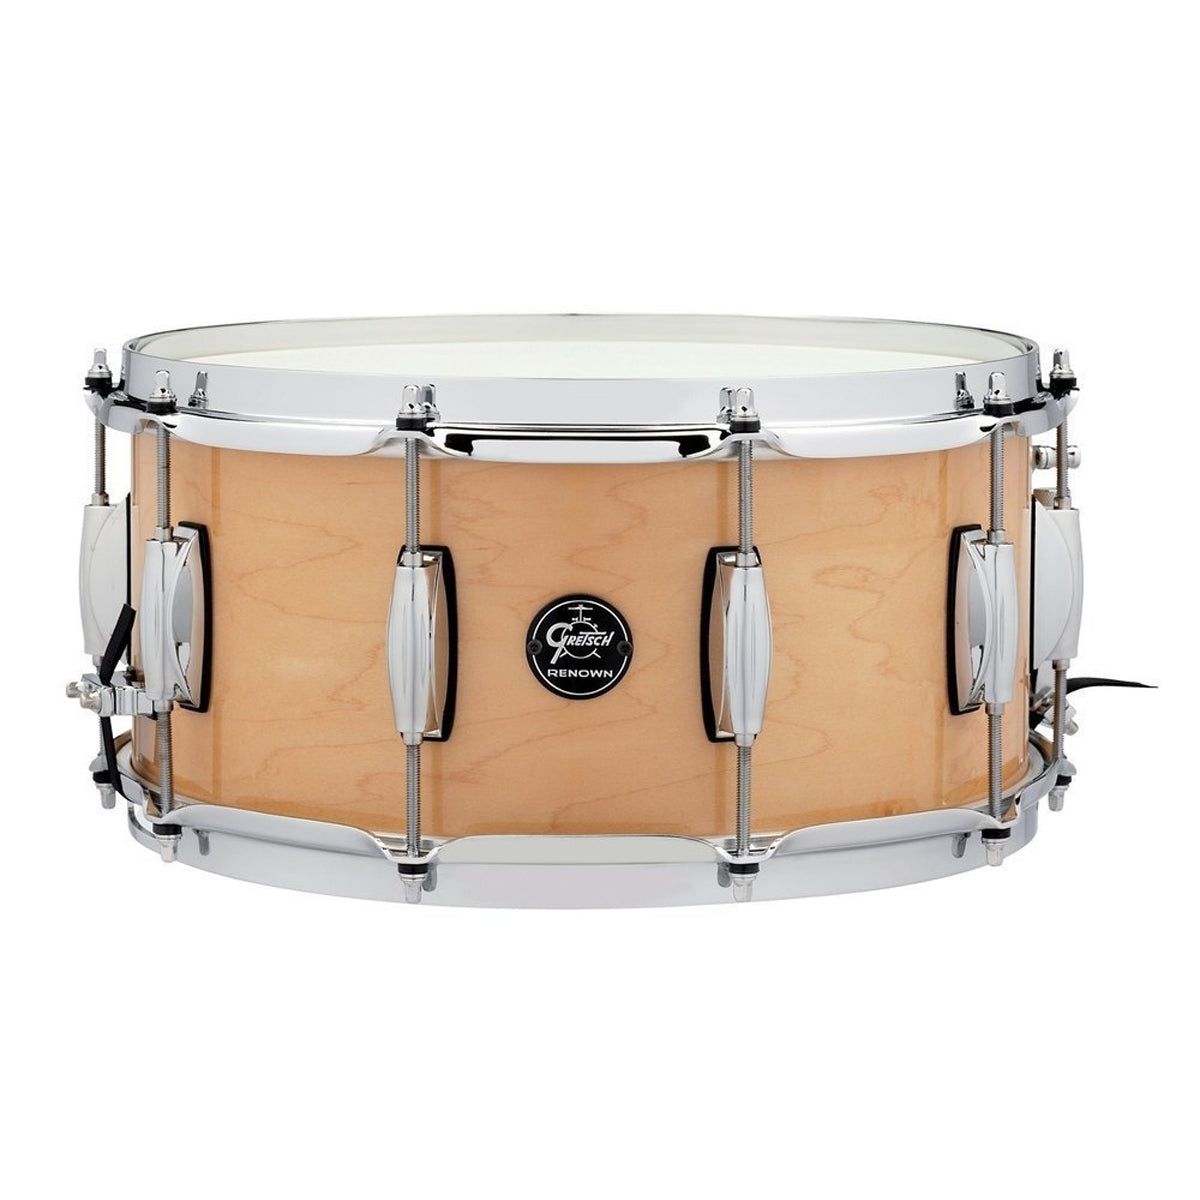 Gretsch Renown Maple 14"x6.5" Snare Drum in Gloss Natural